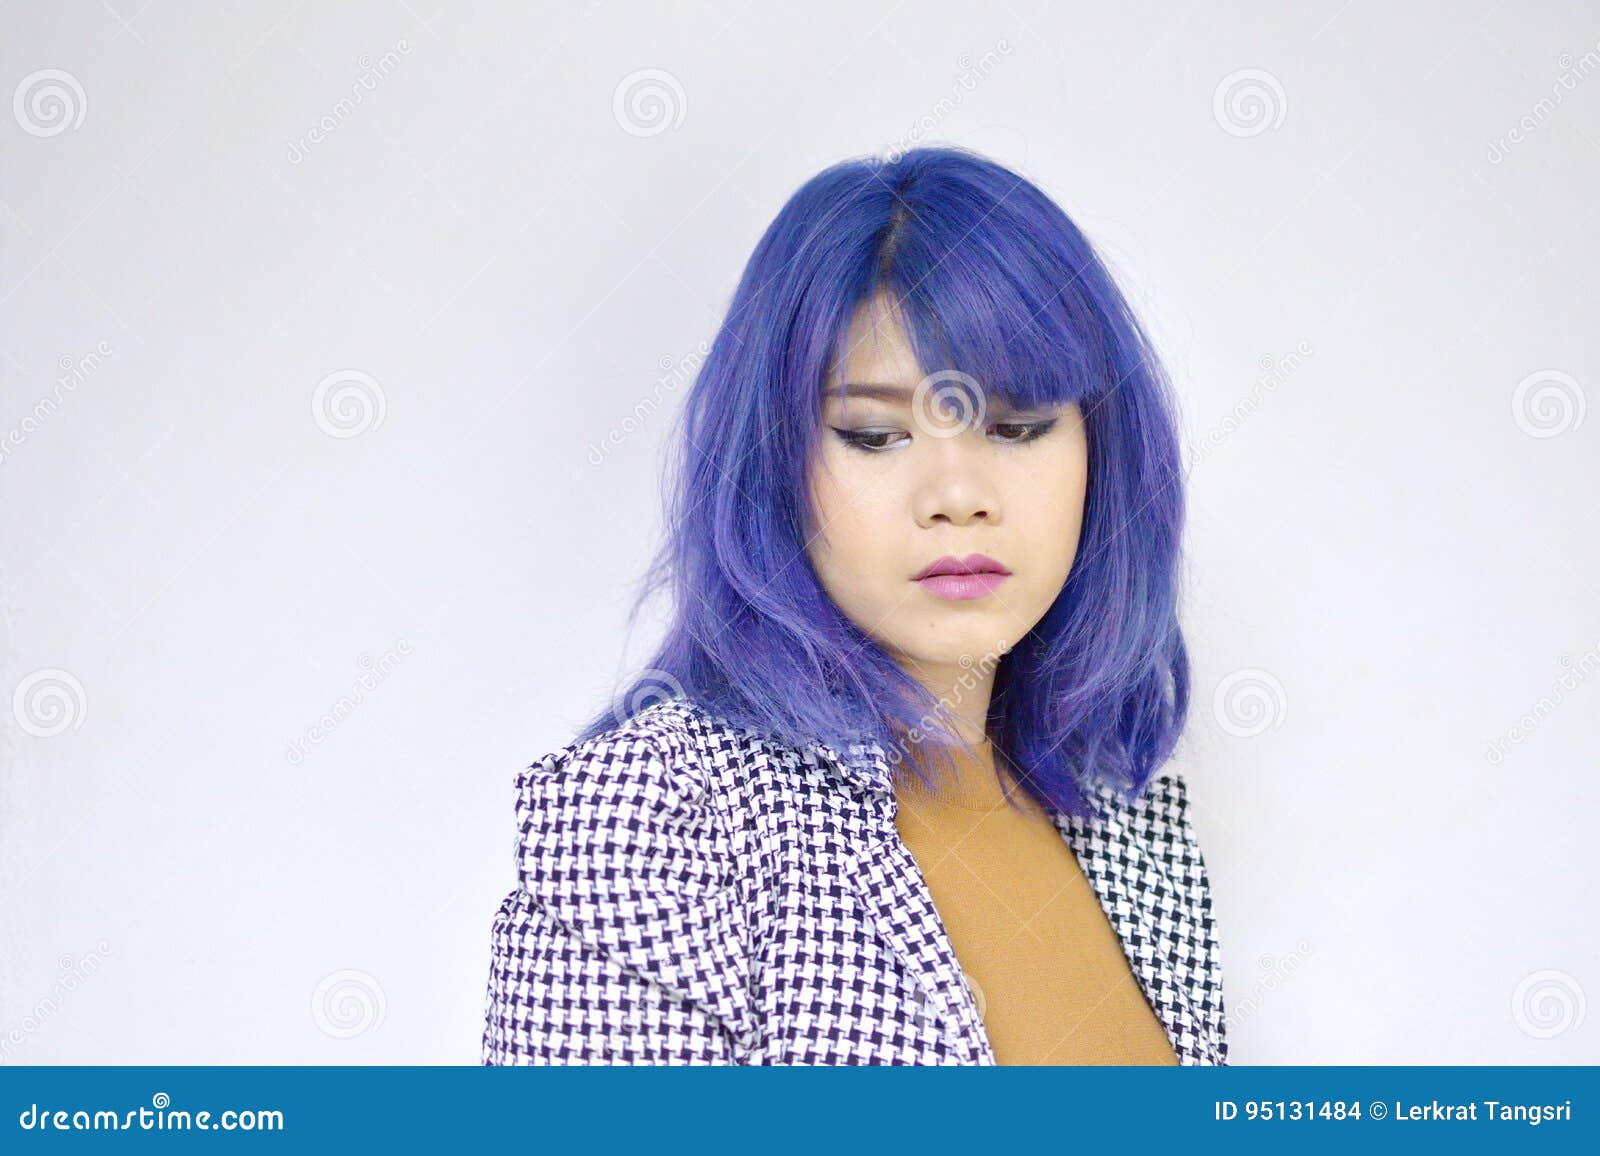 1. "How to Achieve Dark Blue Hair for Asian Hair Types" - wide 11